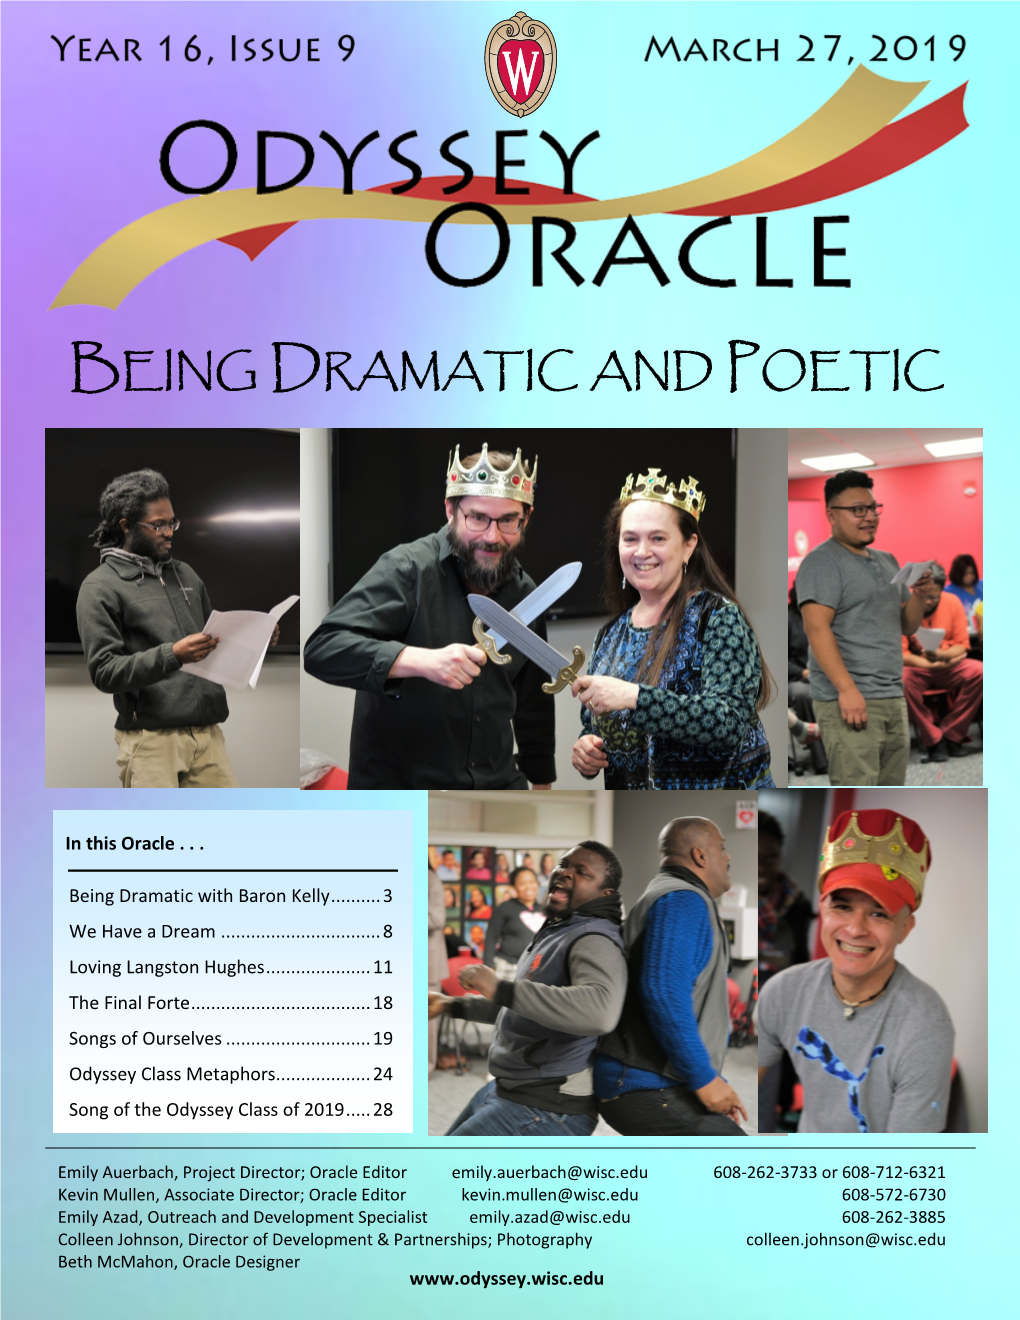 Year 16, Issue 9, March 27, 2019: Being Dramatic and Poetic